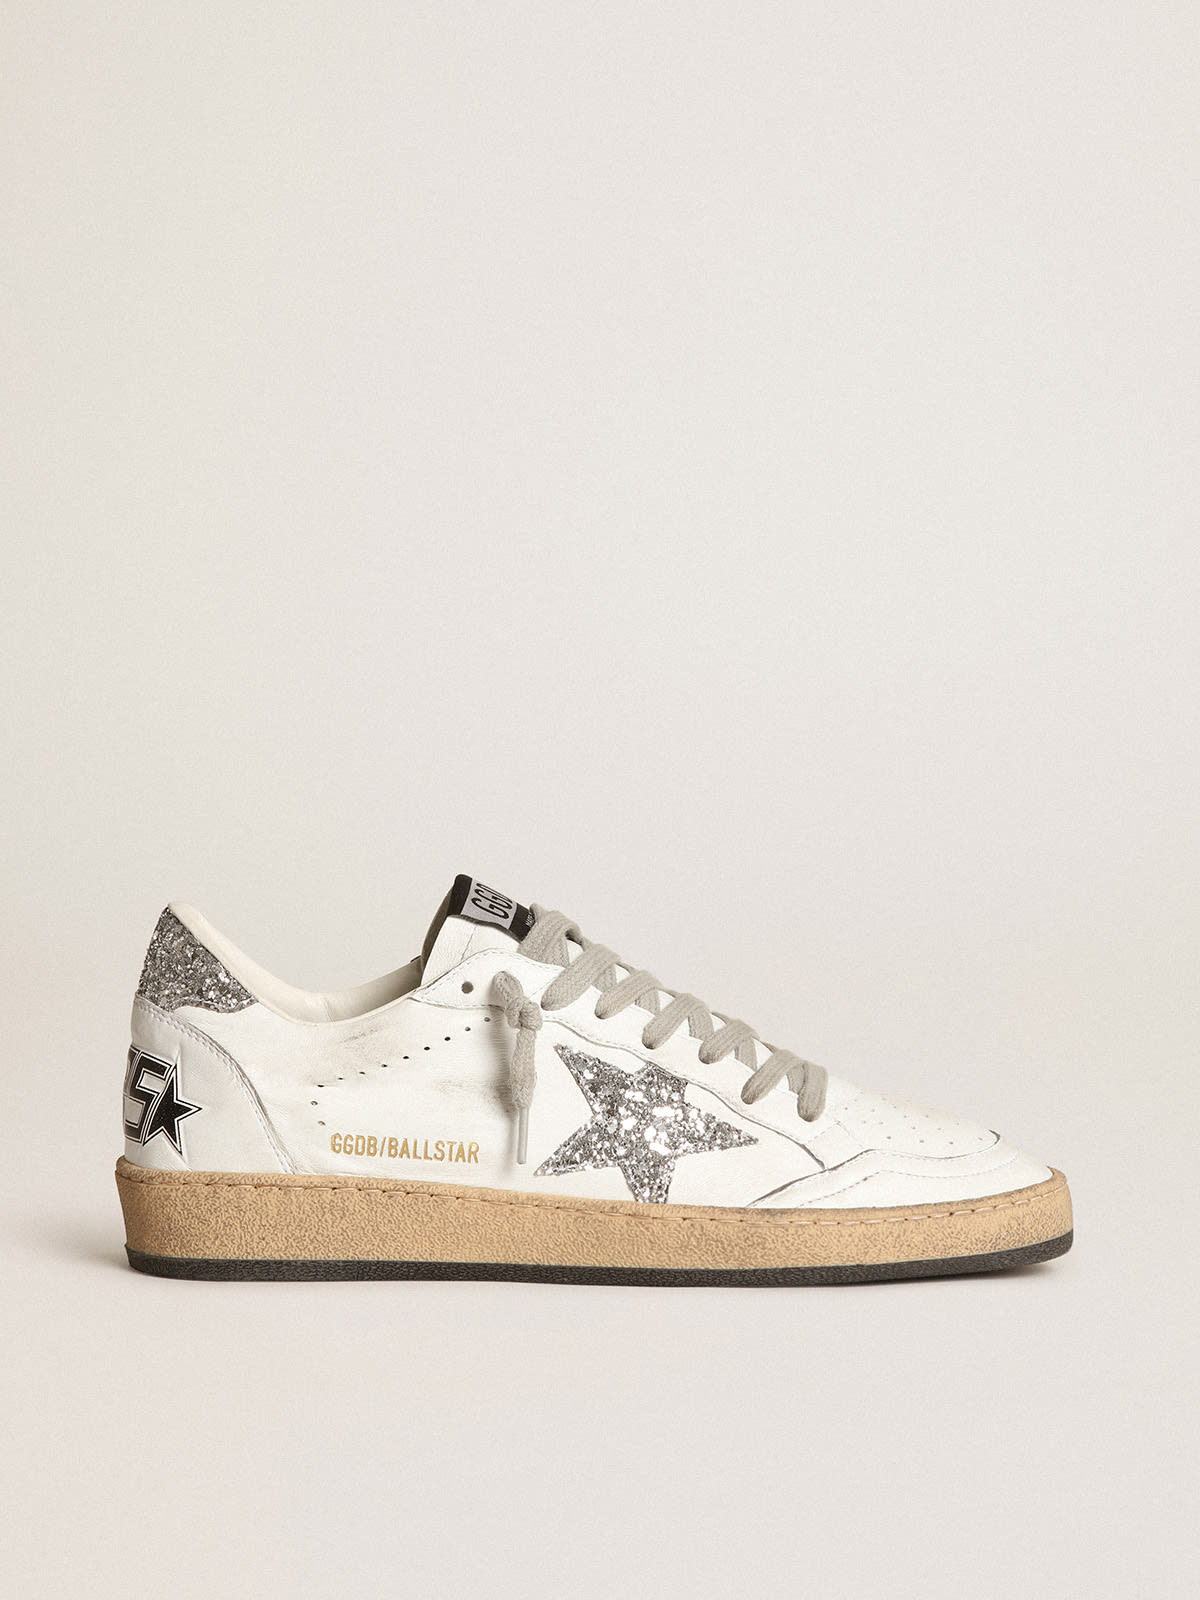 Golden Goose - Women's Ball Star in nappa with white star and glitter heel tab in 